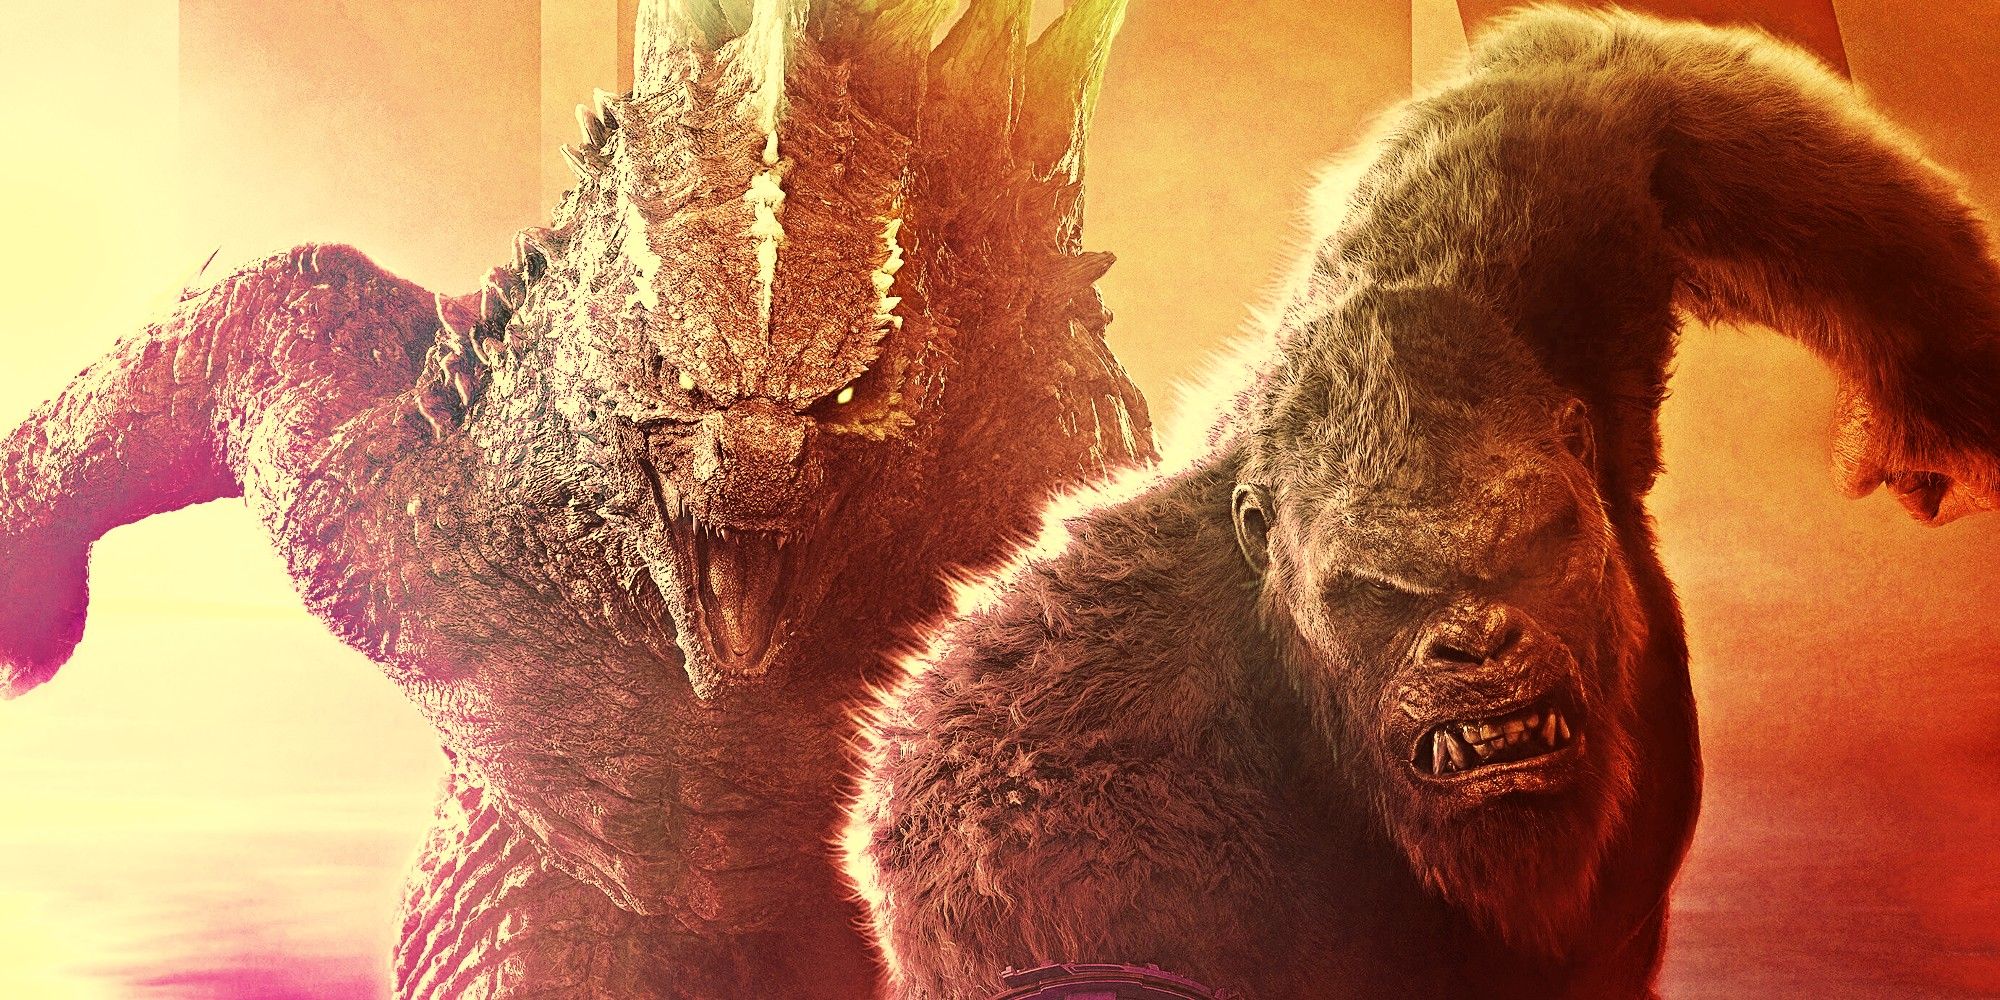 How Much Godzilla X Kong The New Empire Cost To Make & What Box Office